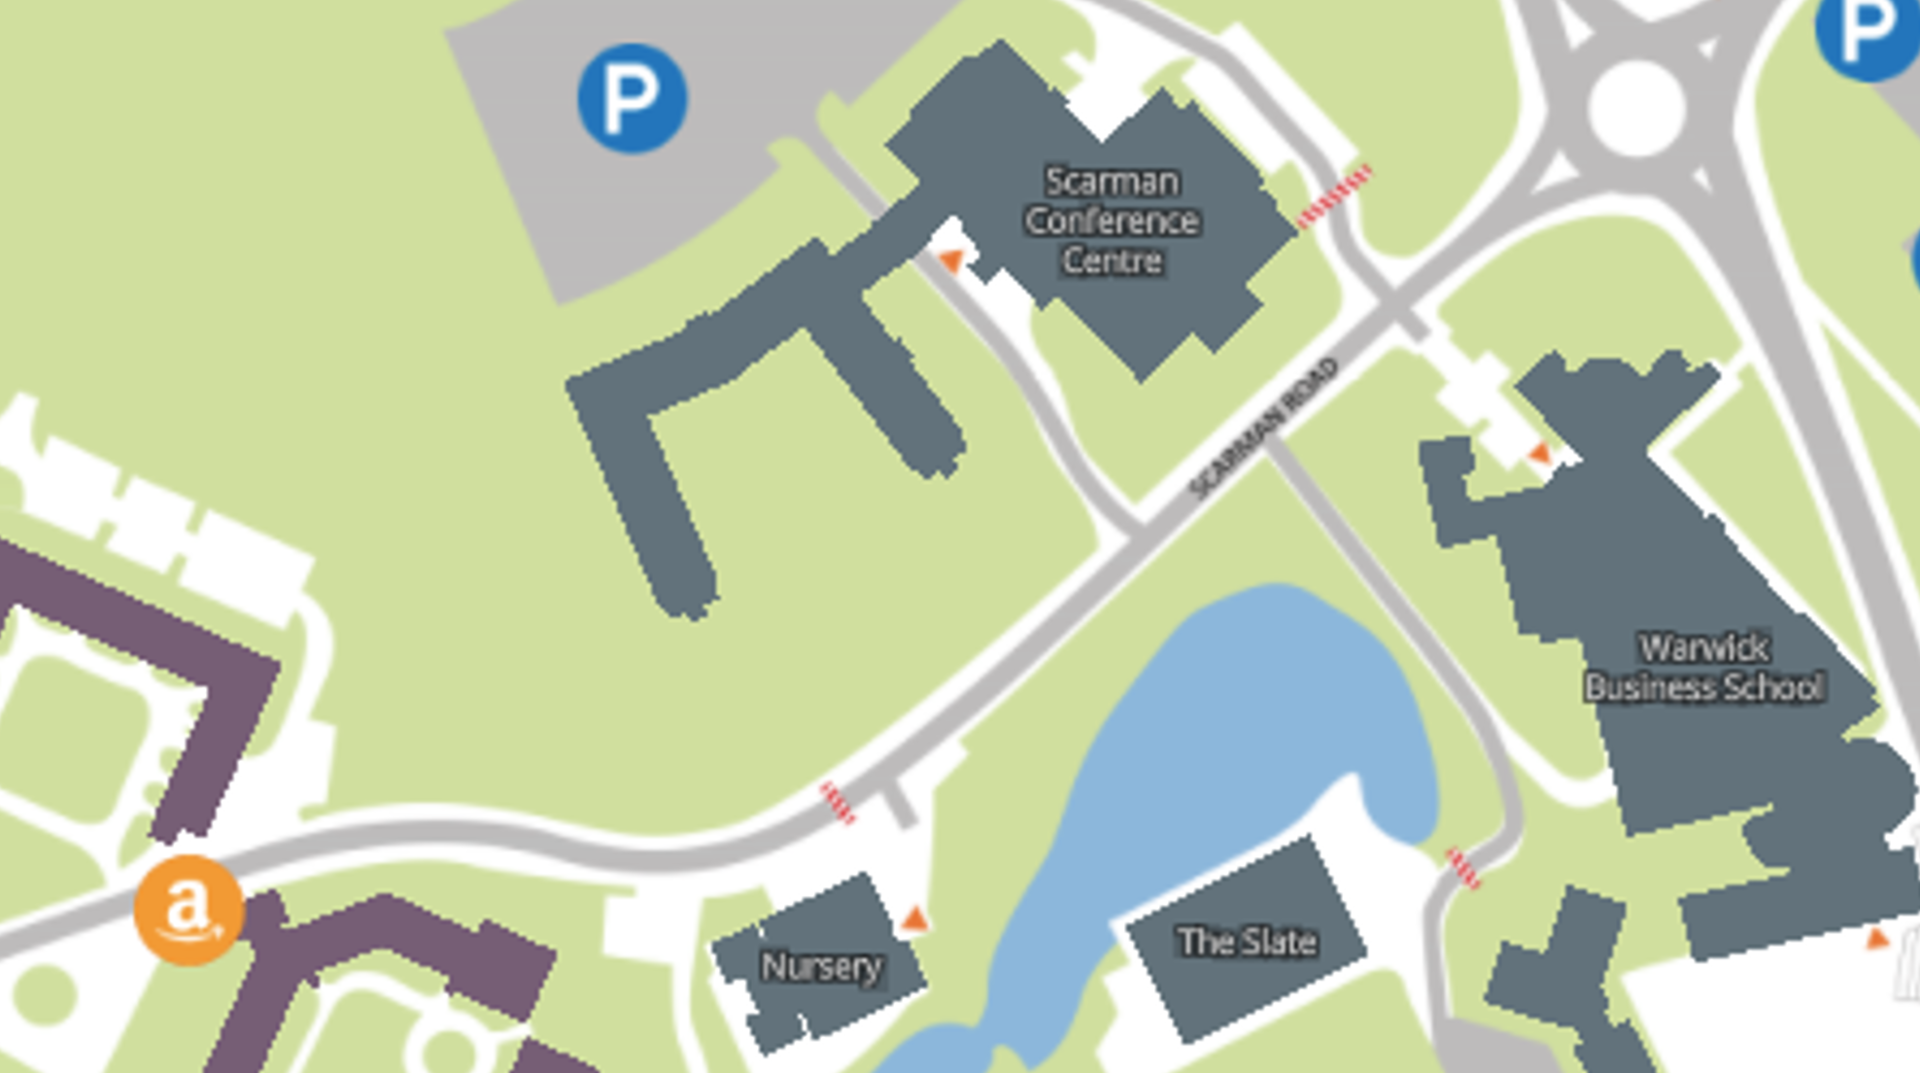 A map of the Scarman Conference Centre